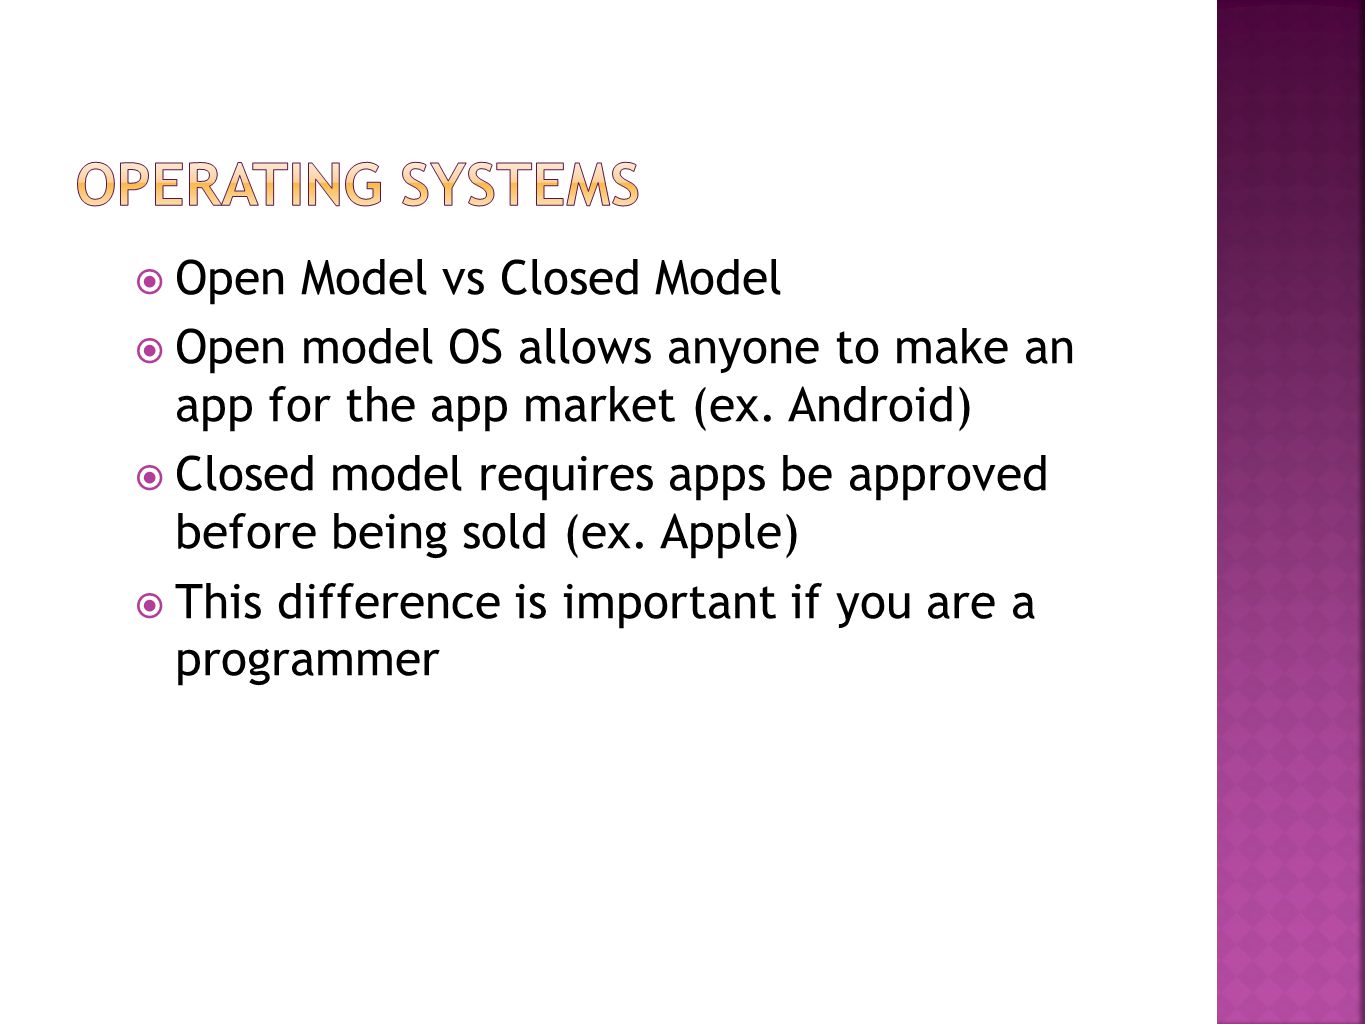  Open Model vs Closed Model  Open model OS allows anyone to make an app for the app market (ex.